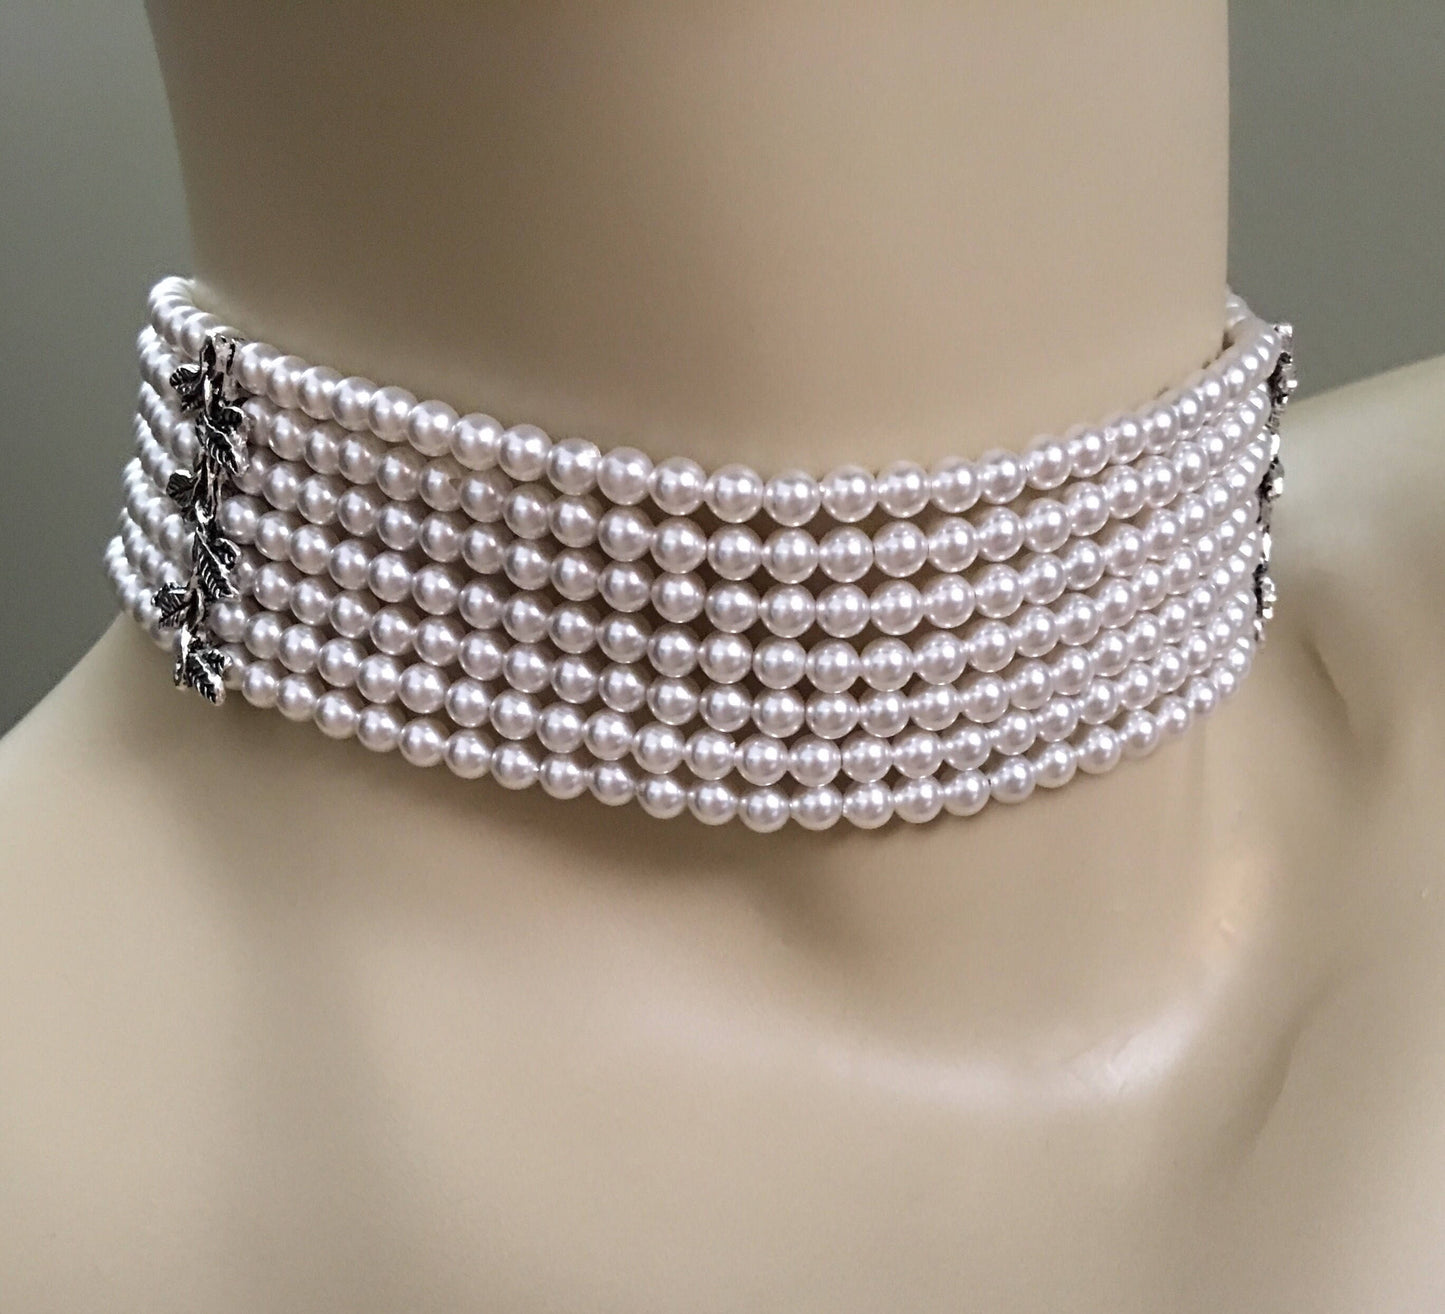 Pearl Choker Necklace Earrings Set 7 strands Swarovski pearls in white with backdrop and antique silver details Gifts for Her READY TO SHIP